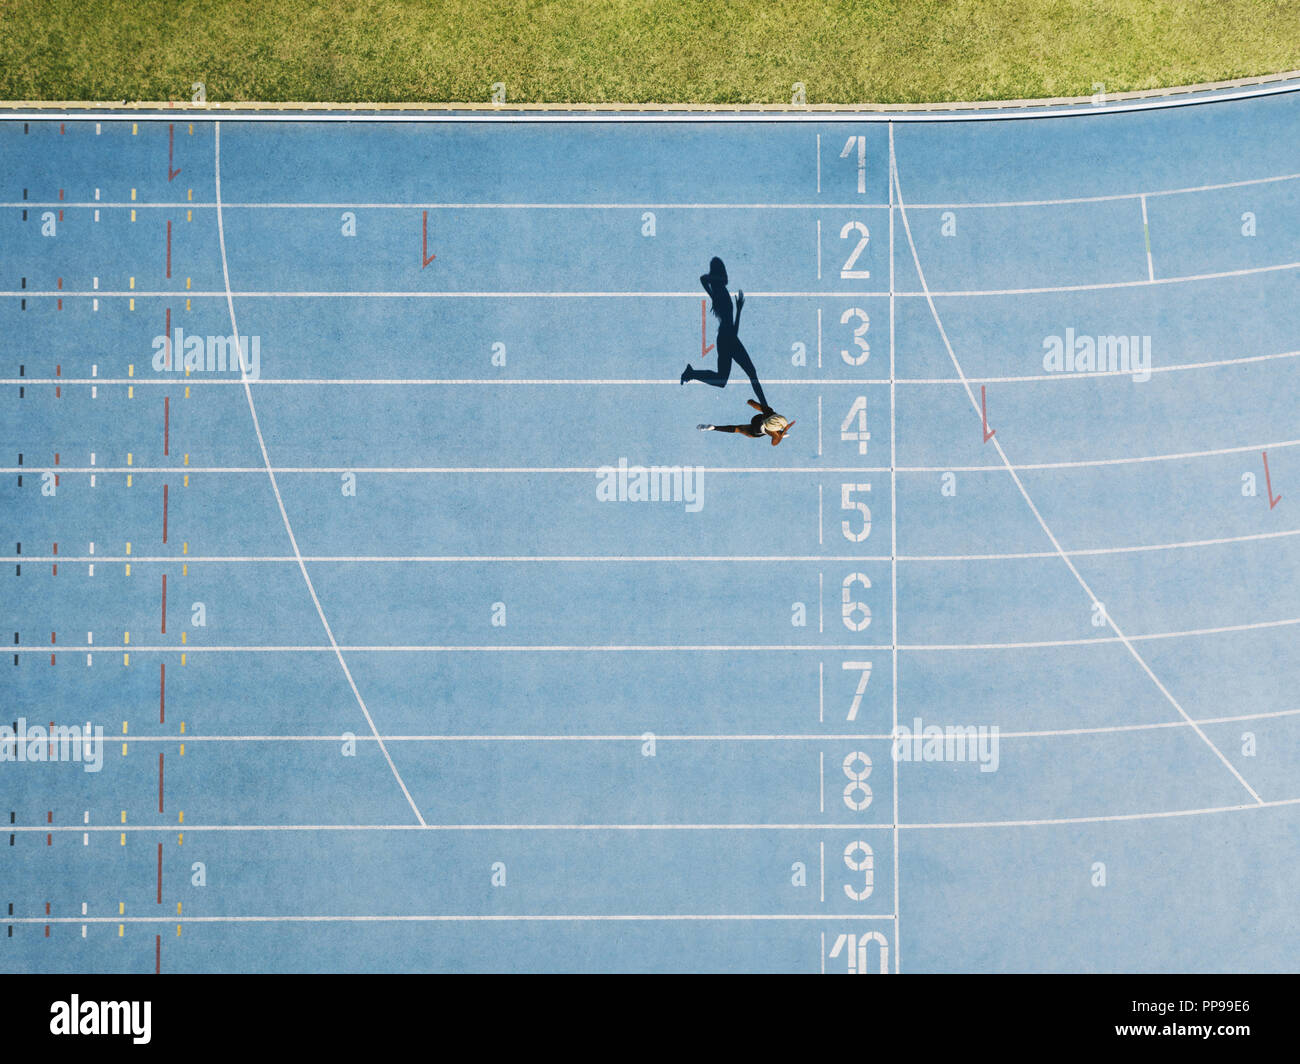 Female sprinter running on athletic track nearing the finish line. Top view of a sprinter running on race track in a stadium. Stock Photo